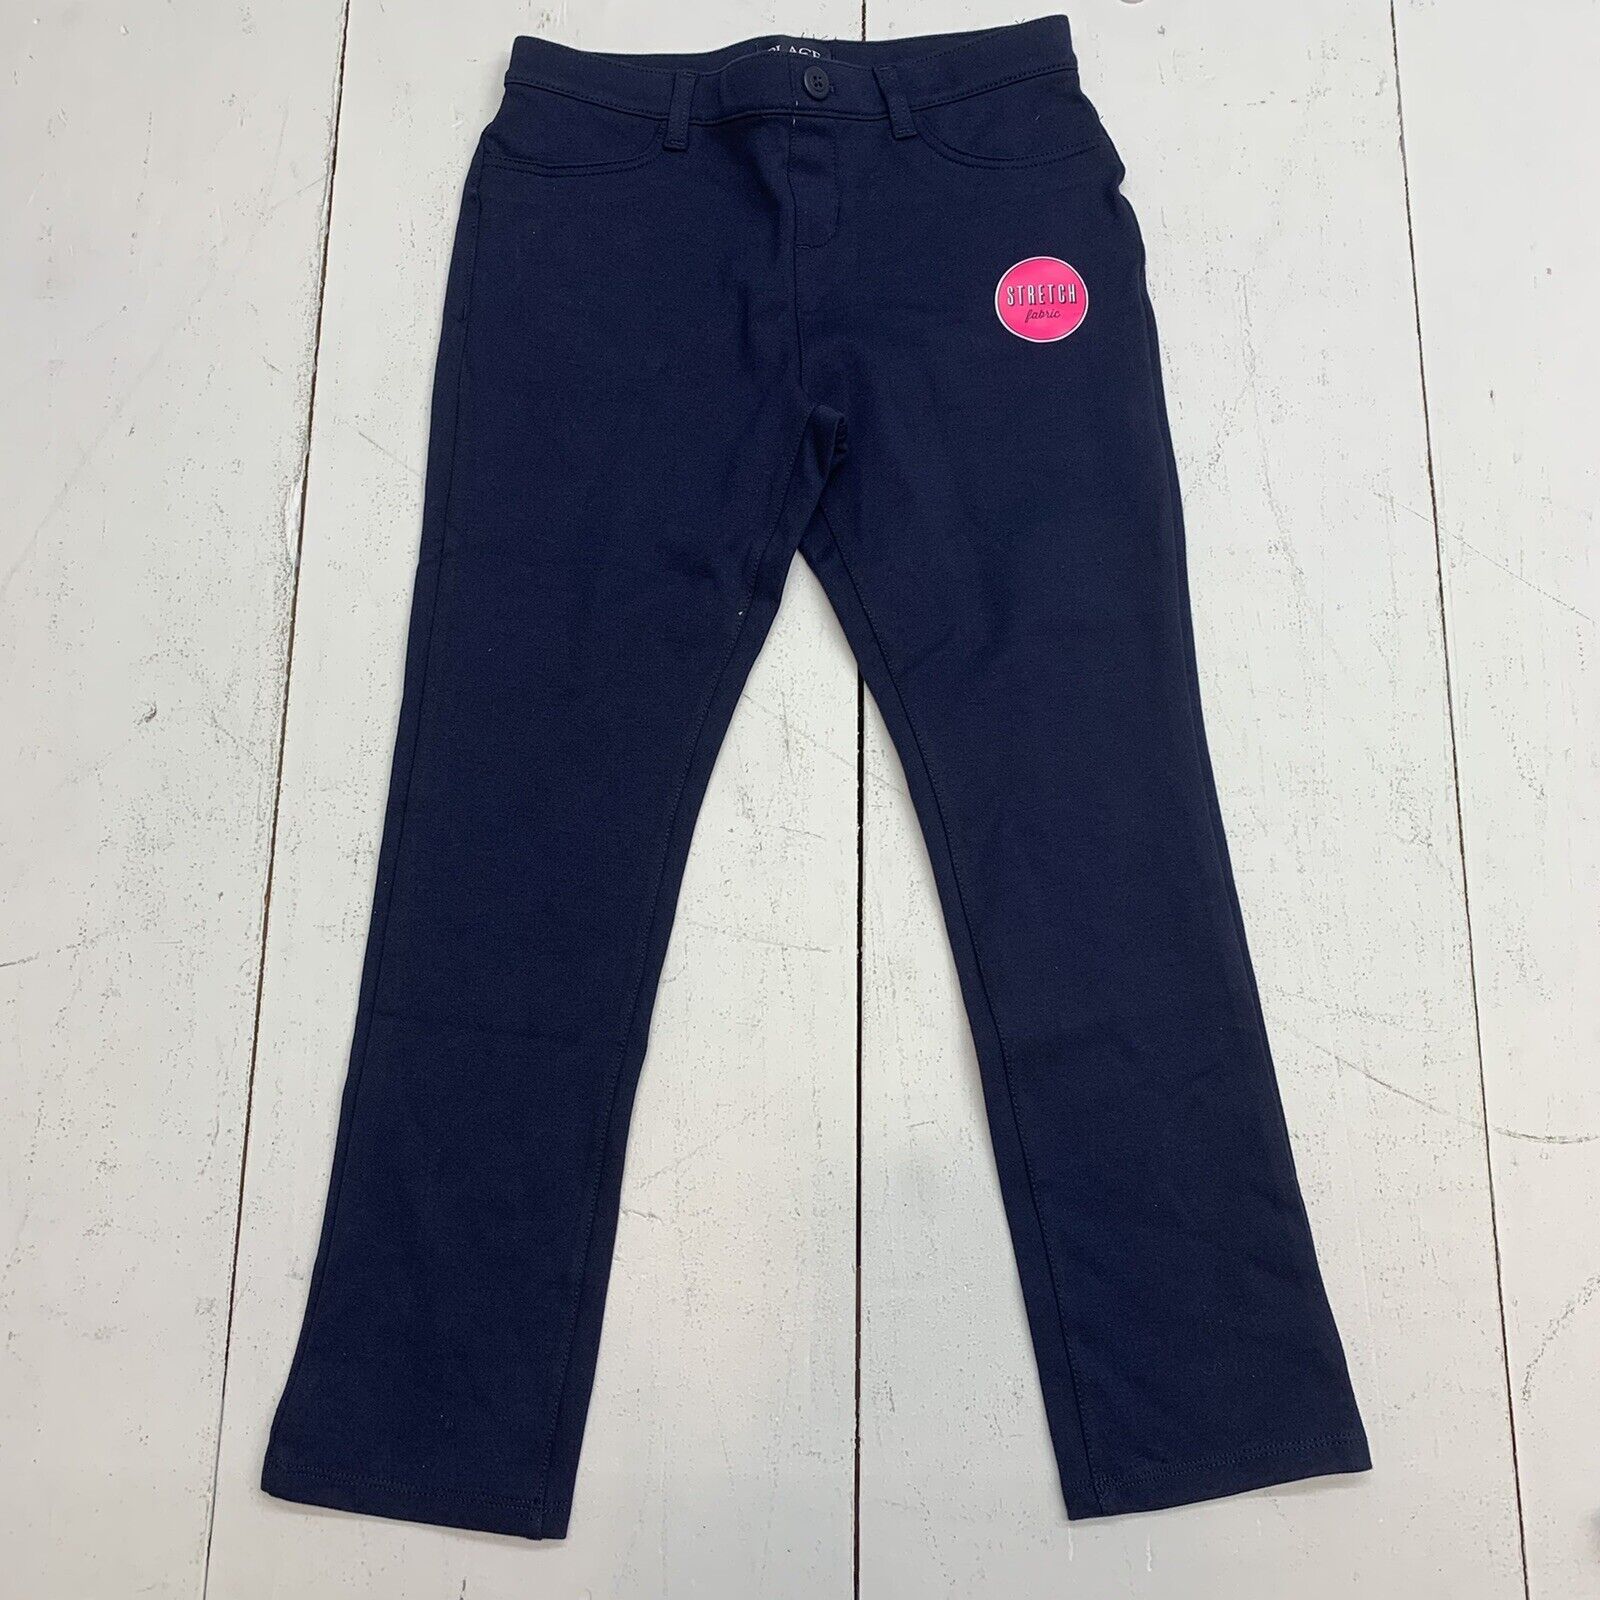 The Childrens Place Girls Blue Pants Size 8 plus